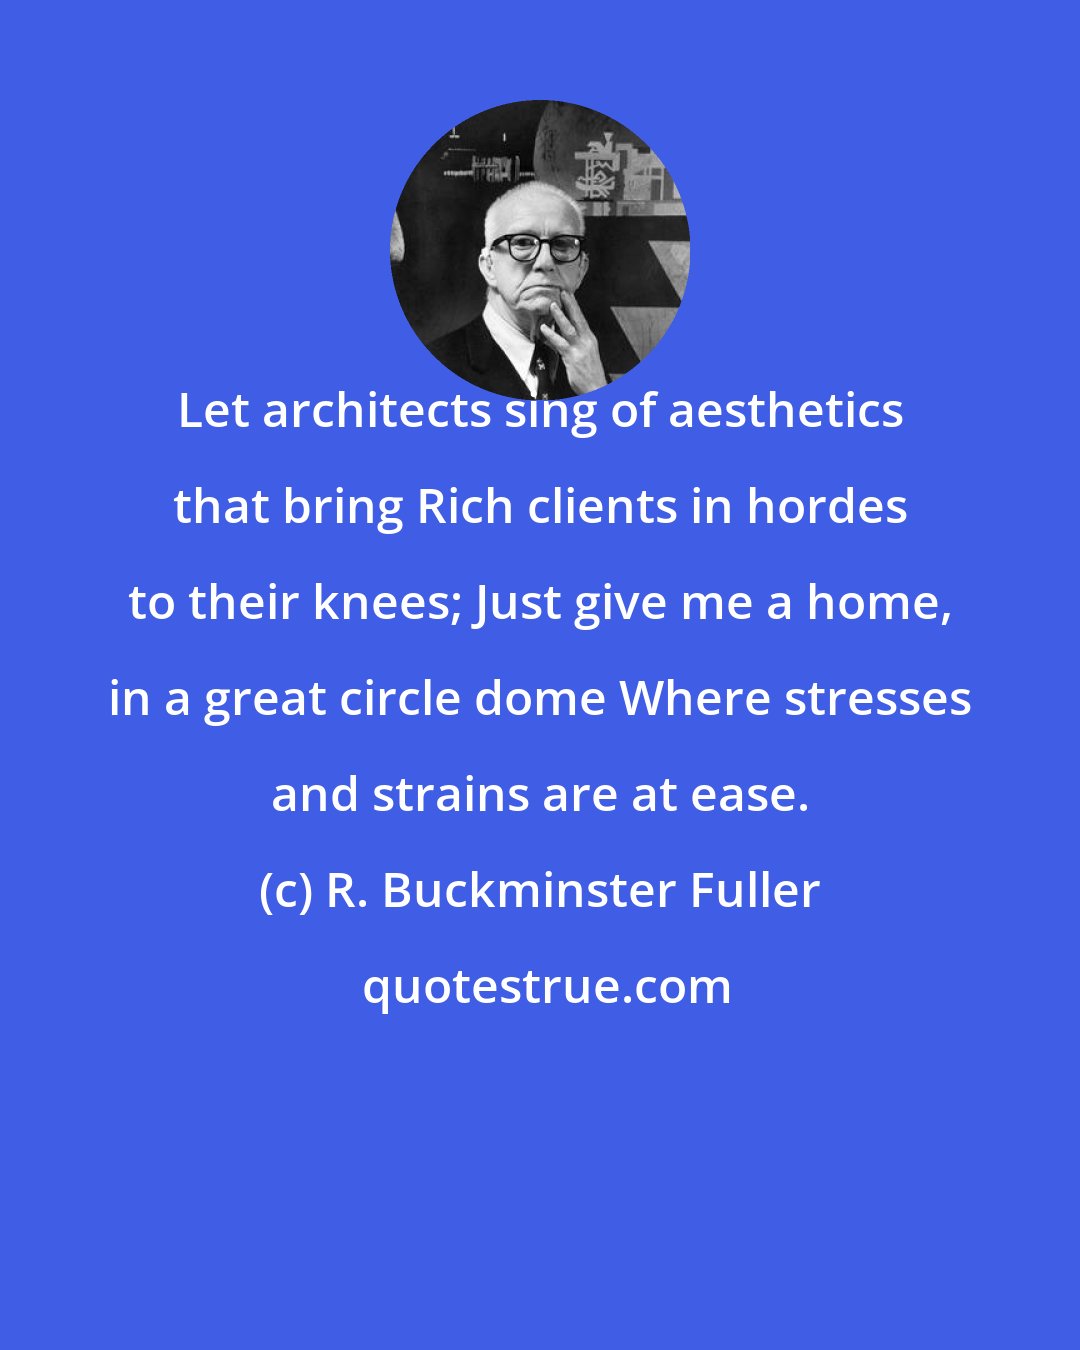 R. Buckminster Fuller: Let architects sing of aesthetics that bring Rich clients in hordes to their knees; Just give me a home, in a great circle dome Where stresses and strains are at ease.